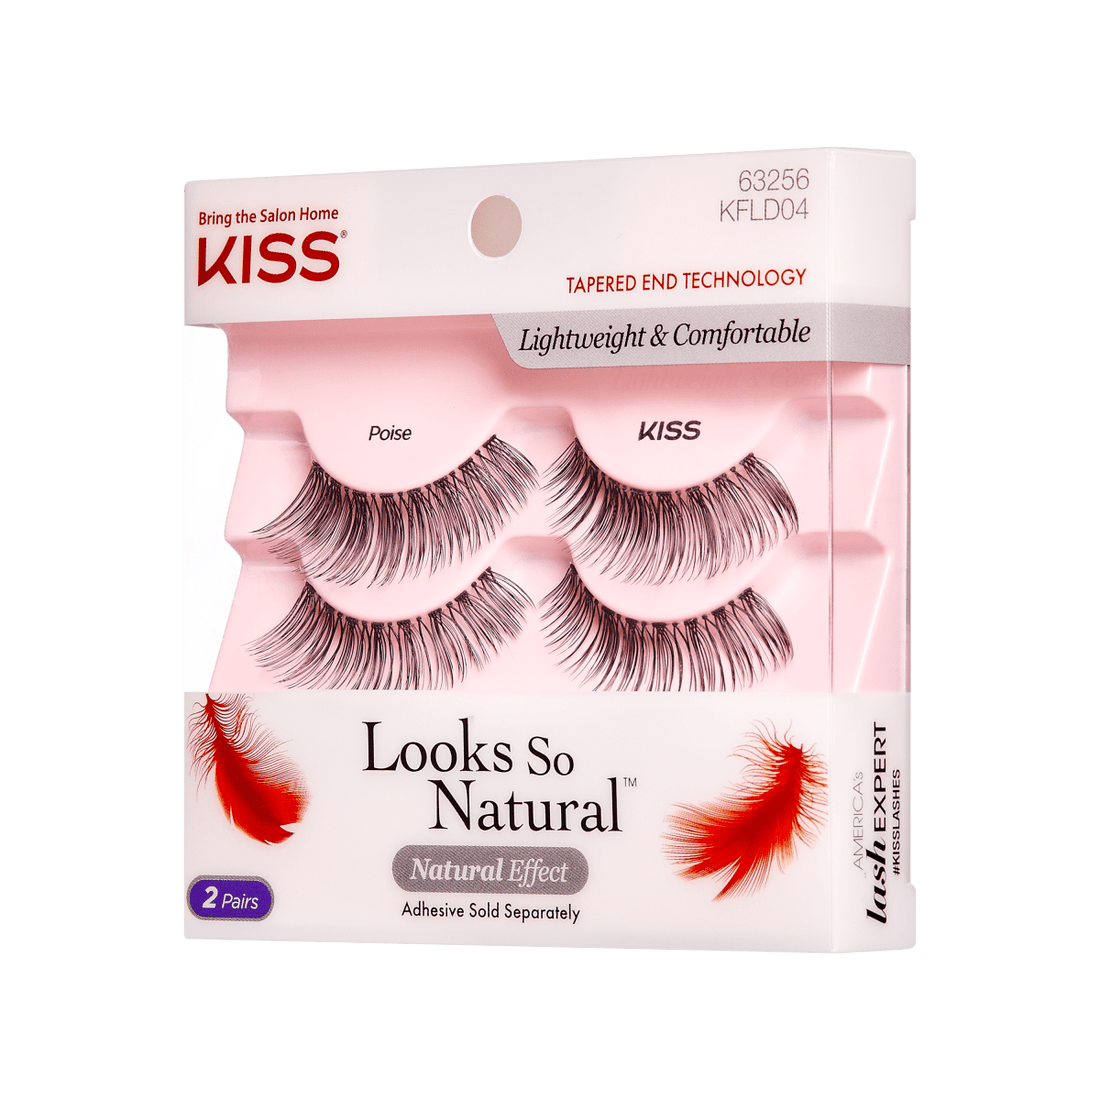 KISS Looks So Natural Double Pack - Poise